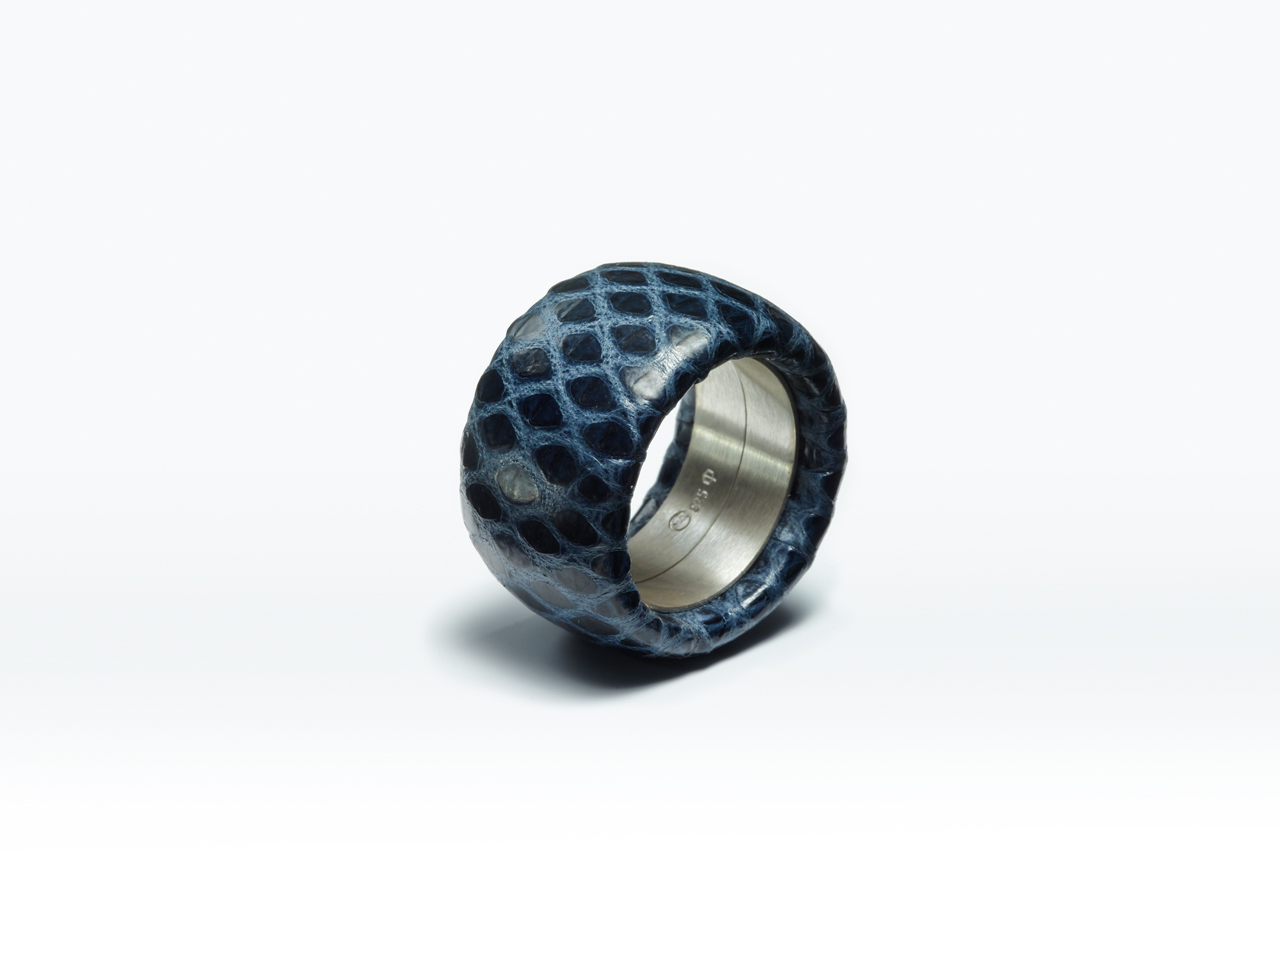 Leather Ring, MERET OPPENHEIM – LEATHER RING, blue